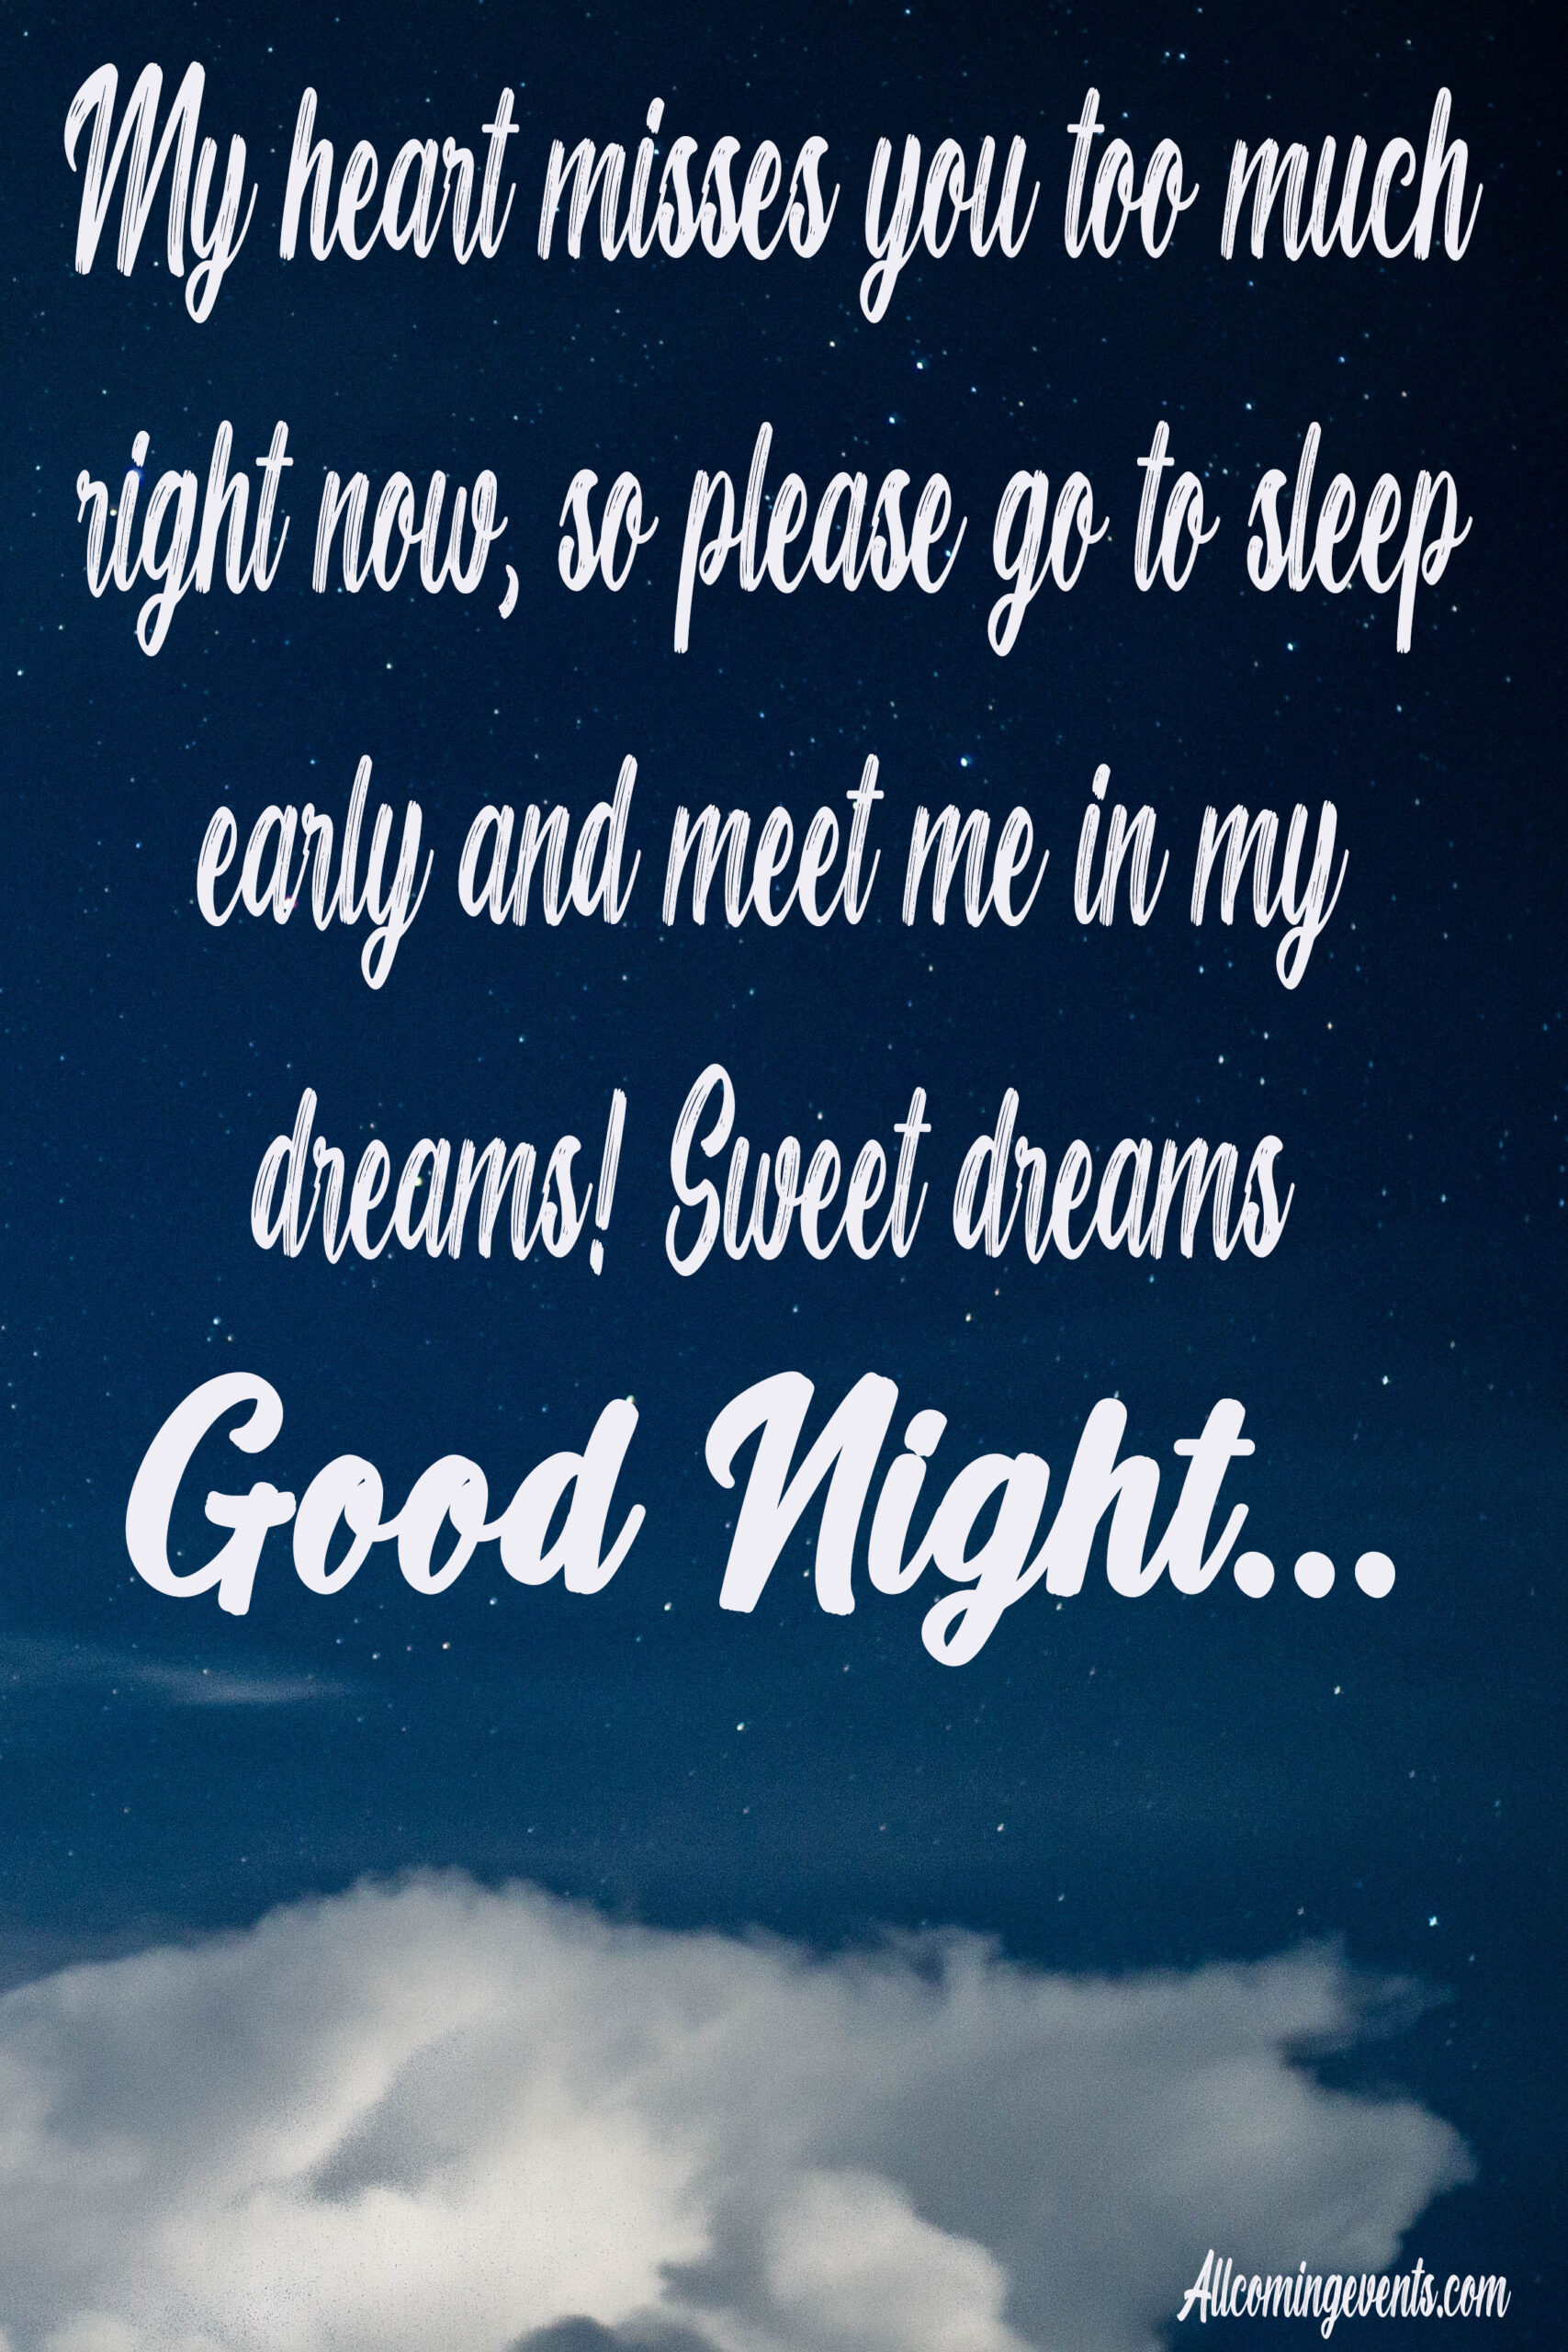 GOOD NIGHT LOVE WISHES | GOOD NIGHT QUOTES